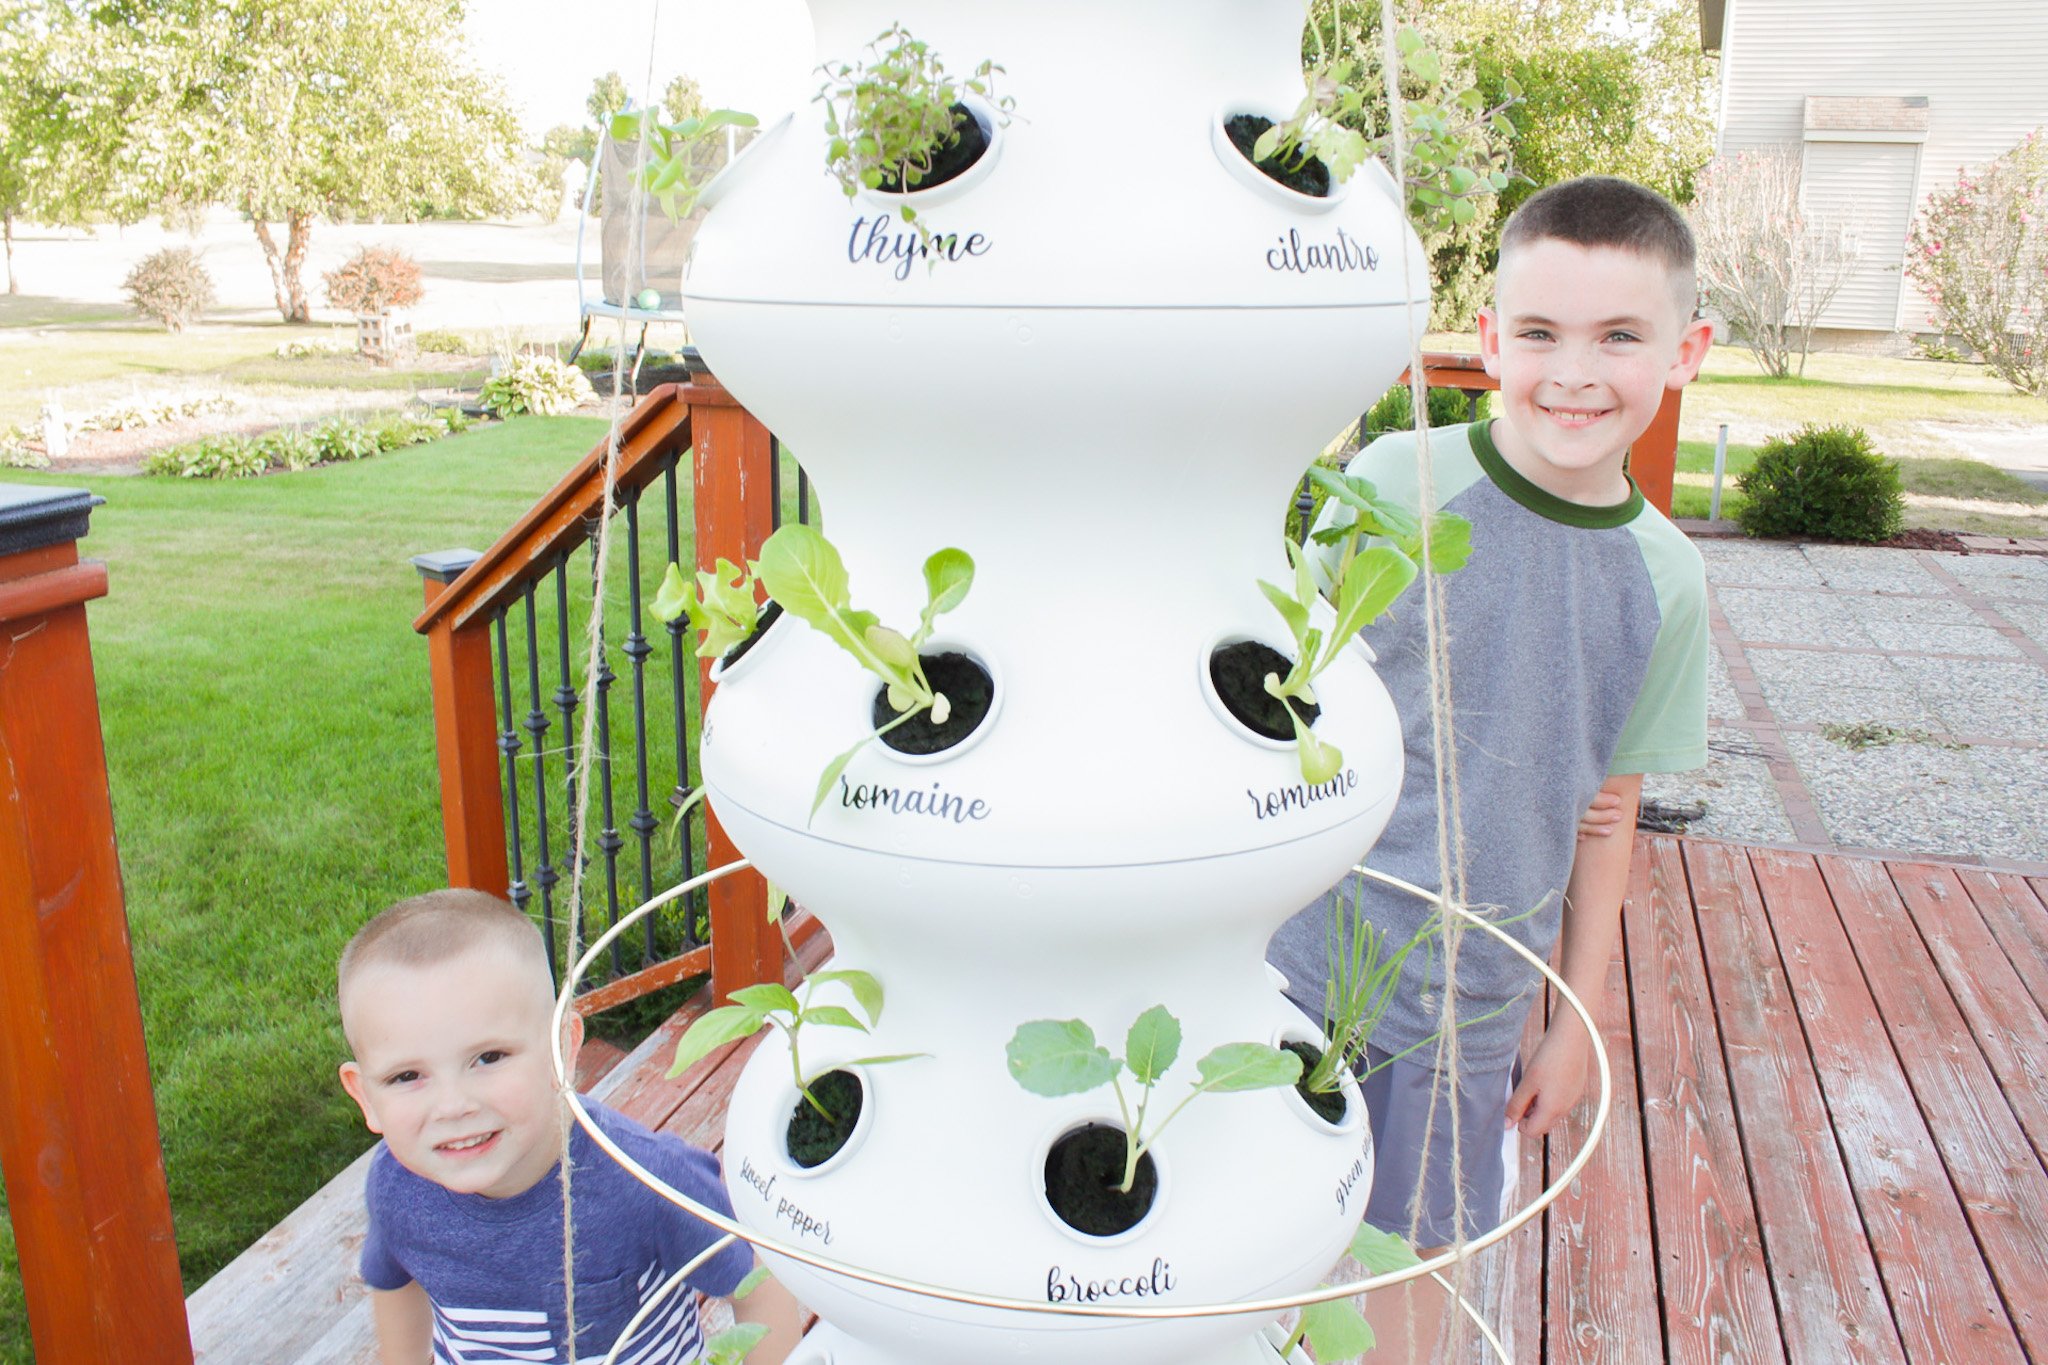 Lettuce Grow FarmStand: Easy Hydroponics Gardening System Review